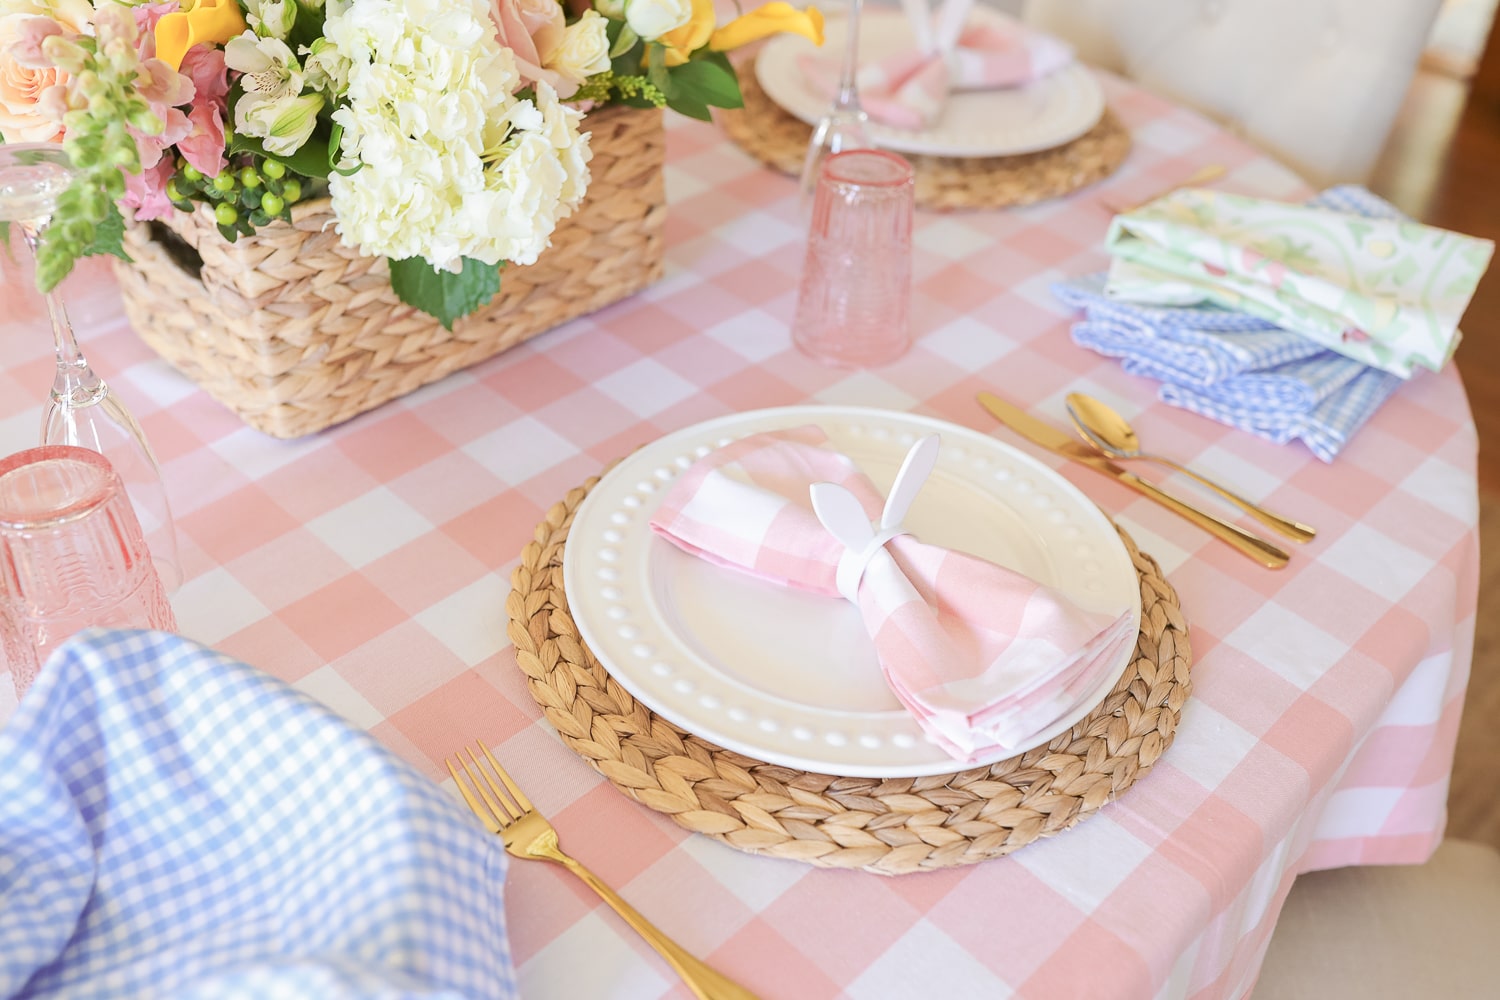 Easter tablescape ideas from blogger Stephanie Ziajka on Diary of a Debutante